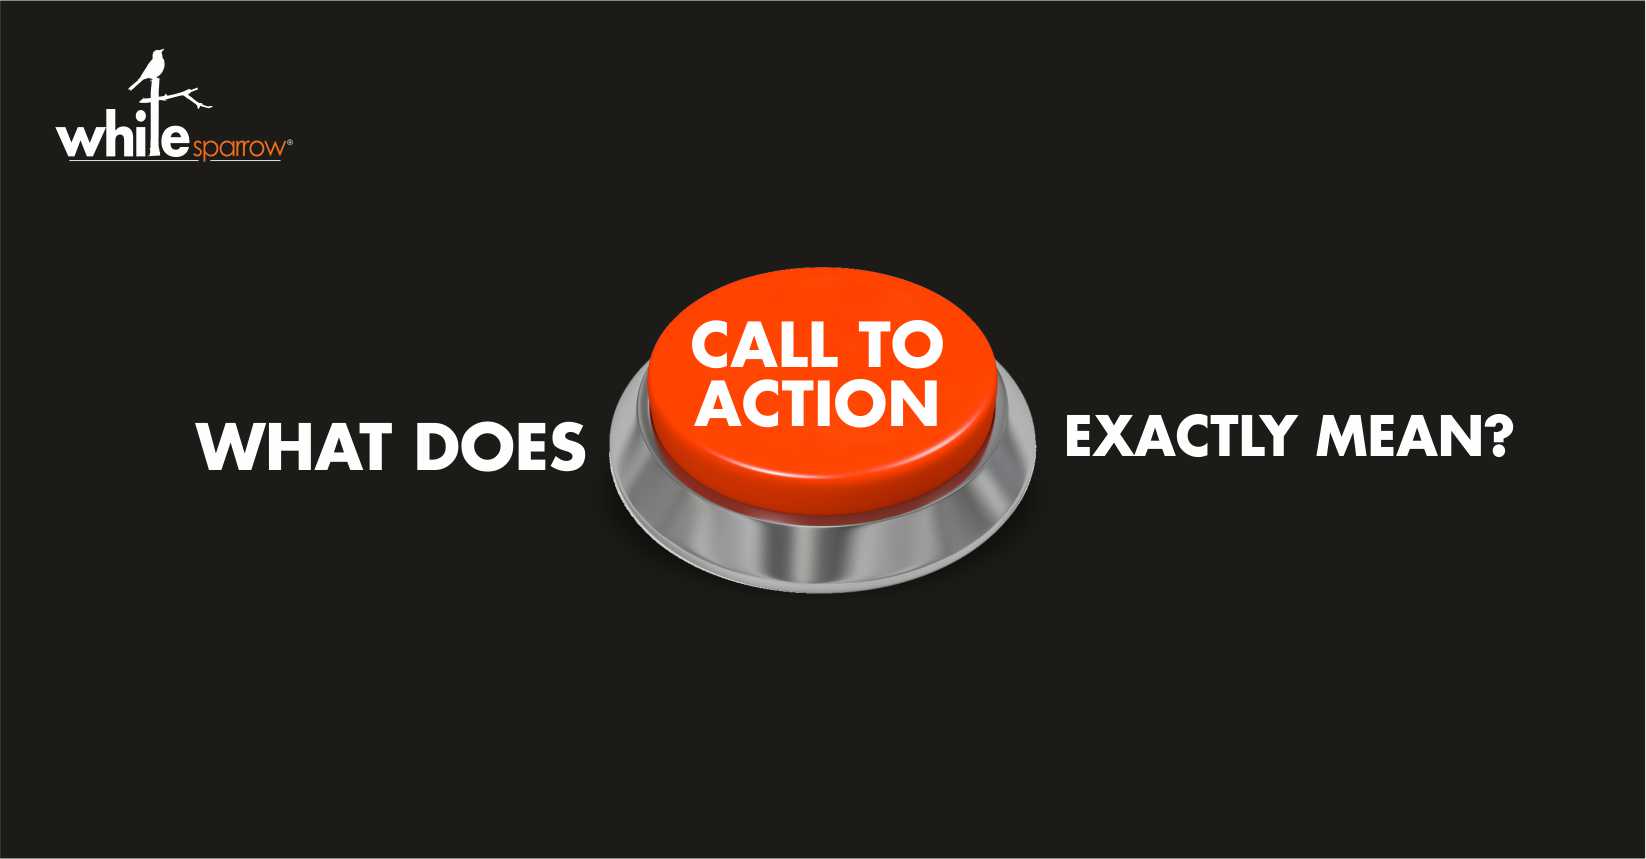 What does “Call To Action” exactly mean?